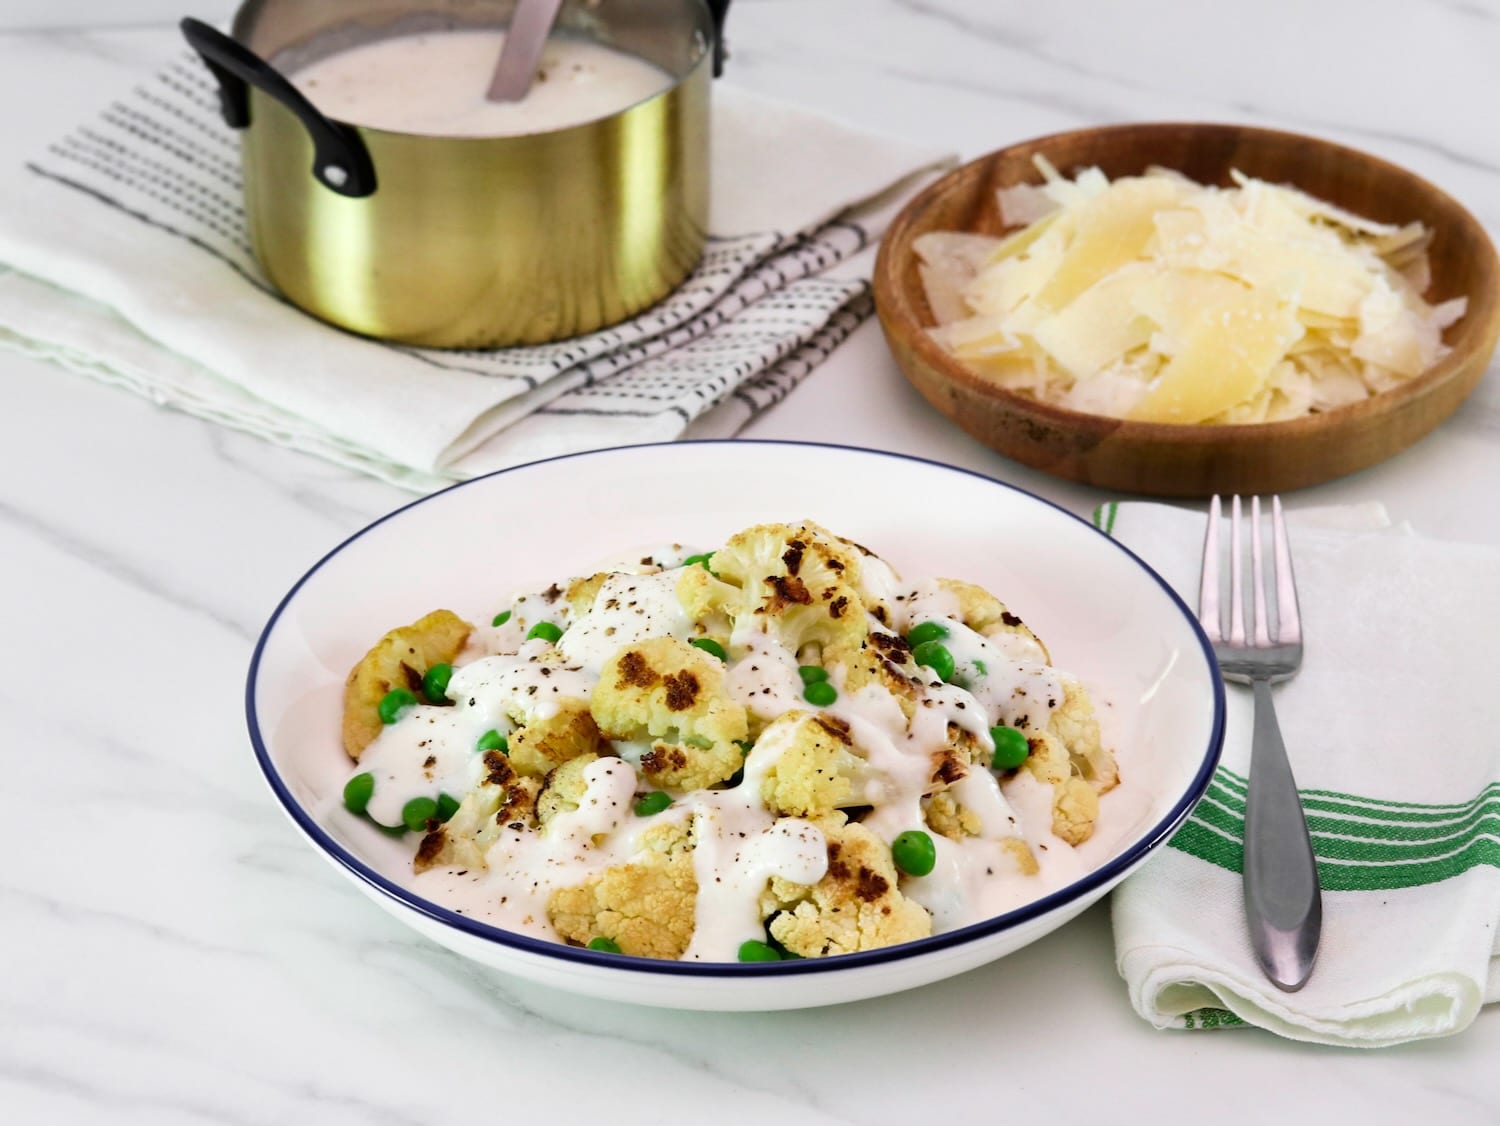 Horizontal shot - large shallow bowl of roasted cauliflower Alfredo with peas, covered in a rich Greek yogurt Alfredo sauce, on a marble countertop. Fork and napkin with green stripes beside the bowl. Small wooden bowl of shaved parmesan in upper right corner of the picture, and a small gold metal pan of Alfredo sauce with freshly cracked black pepper in upper left hand corner. Gold pan rests on a white linen towel.